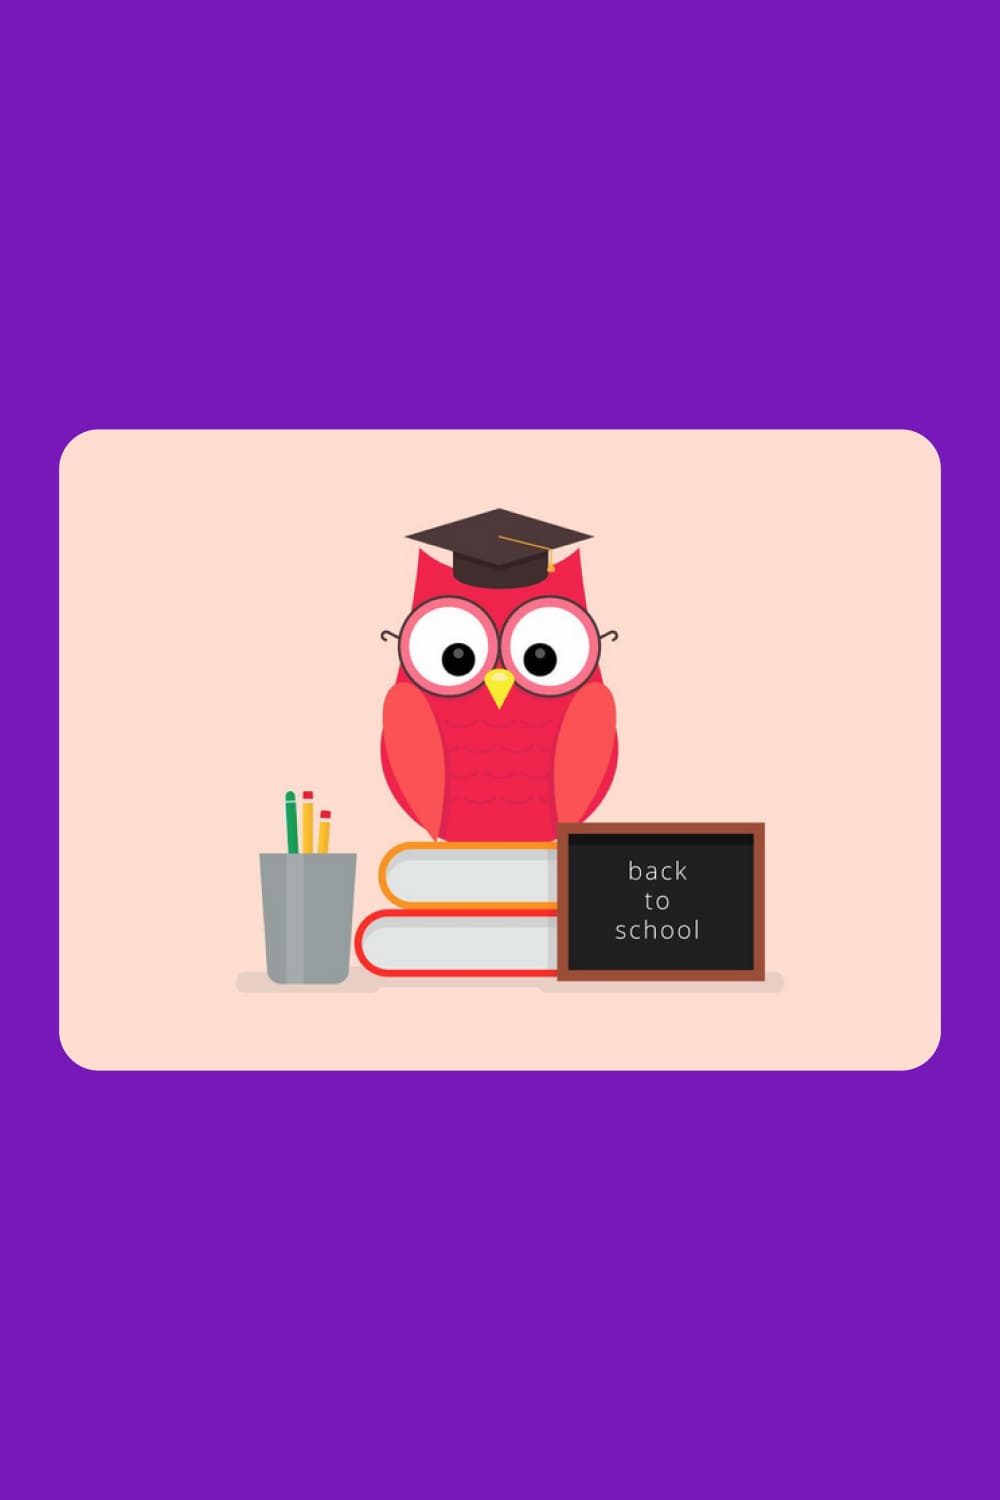 Drawn funny red owl with graduate cap sitting on books.